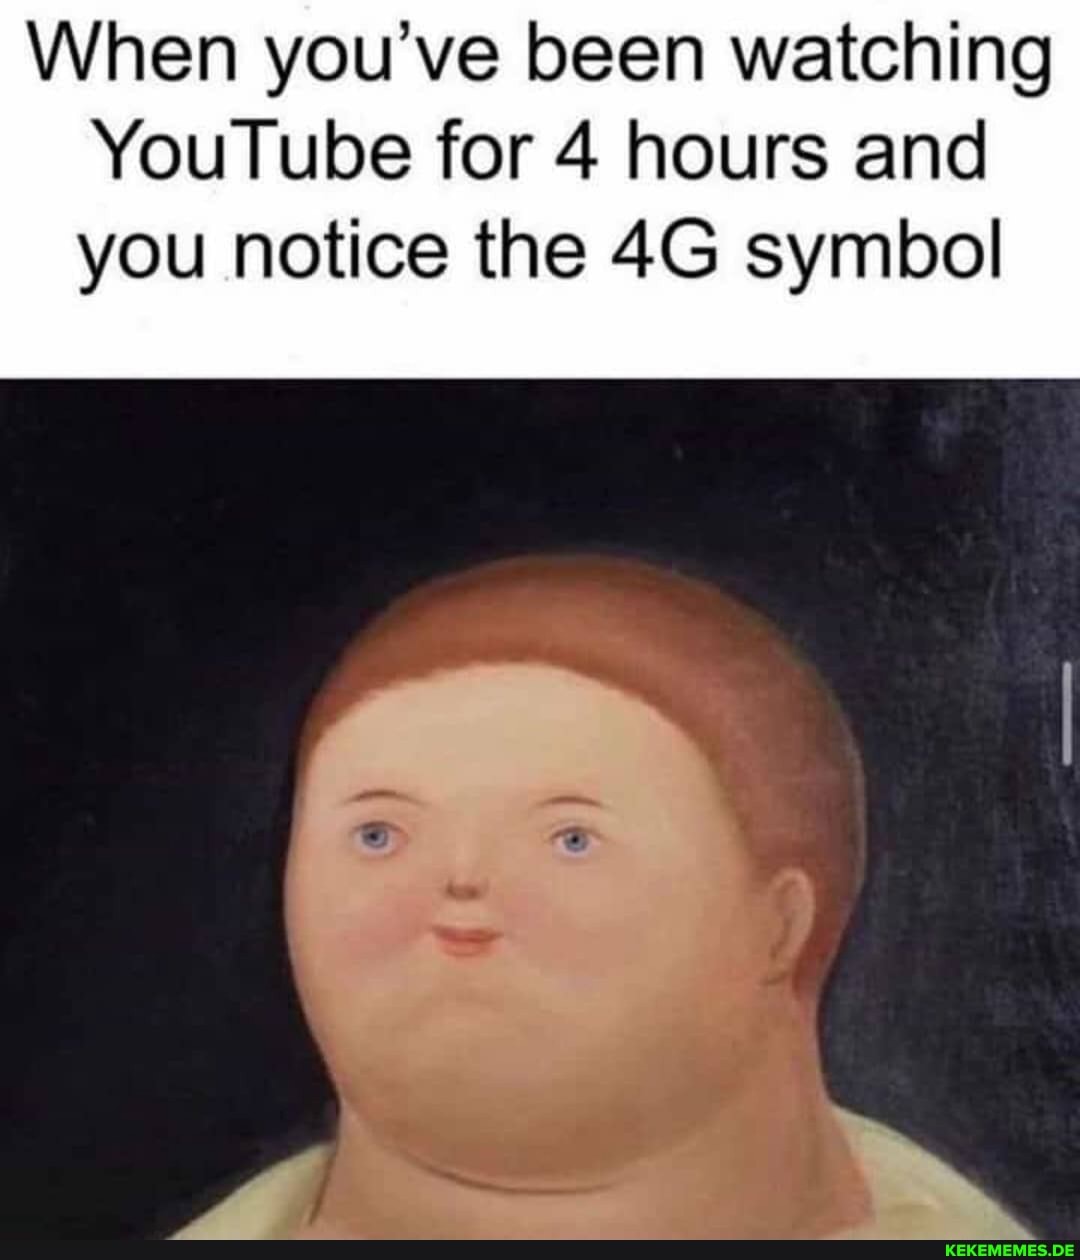 When you've been watching YouTube for 4 hours and you notice the symbol